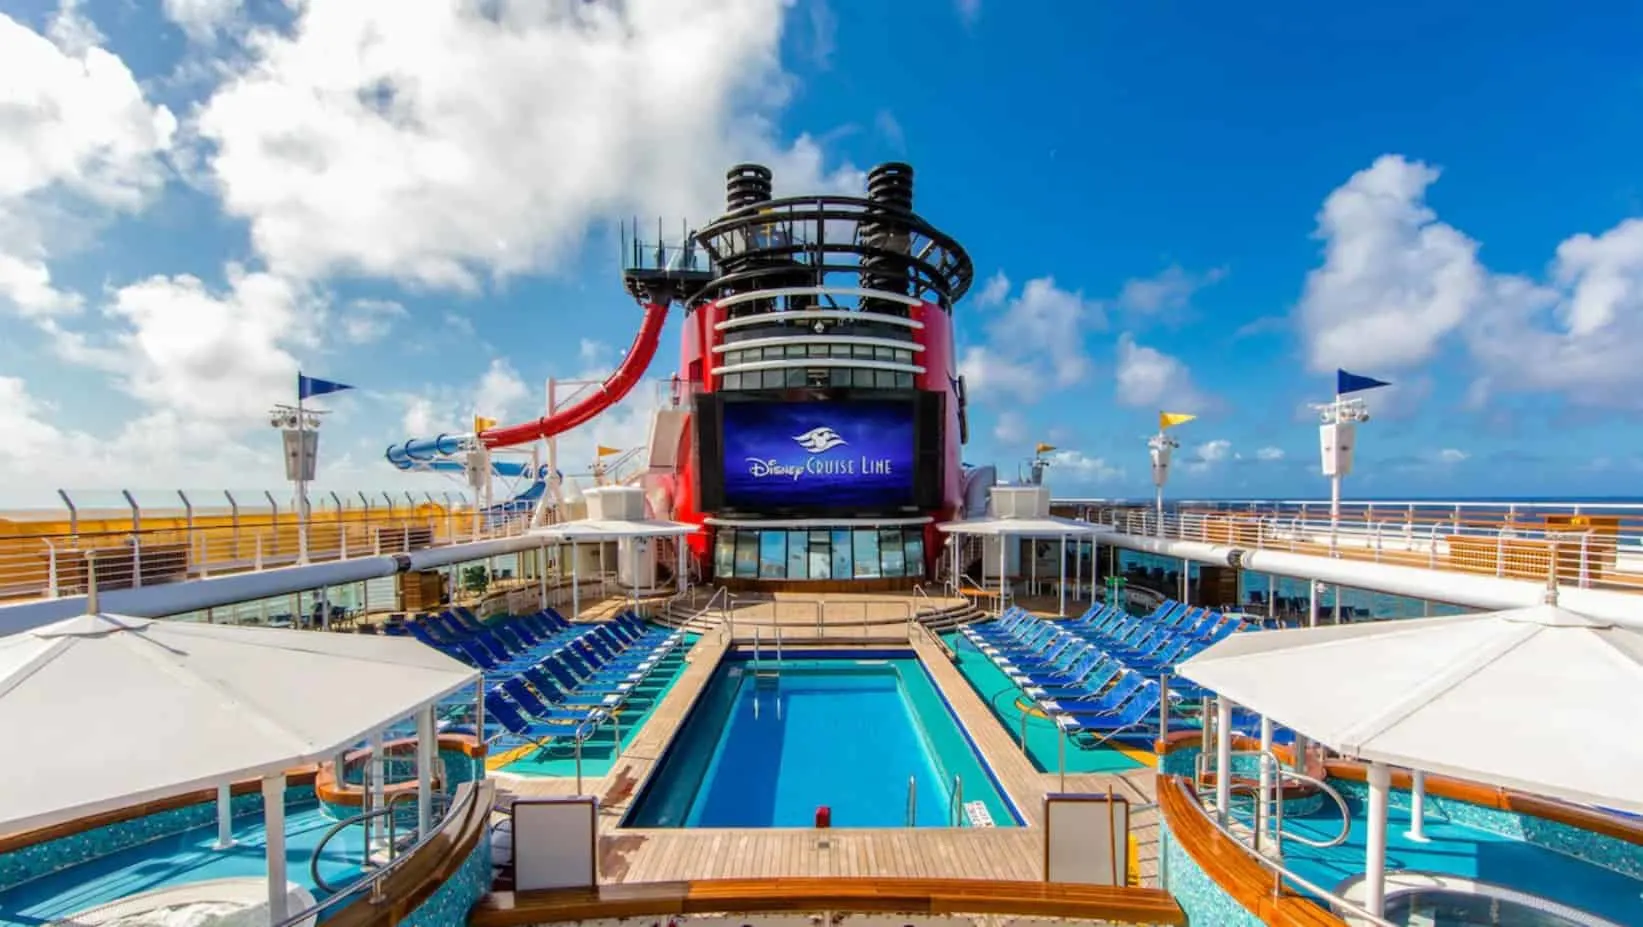 New Disney+ Subscriber Offer Announced For Disney Cruise Line